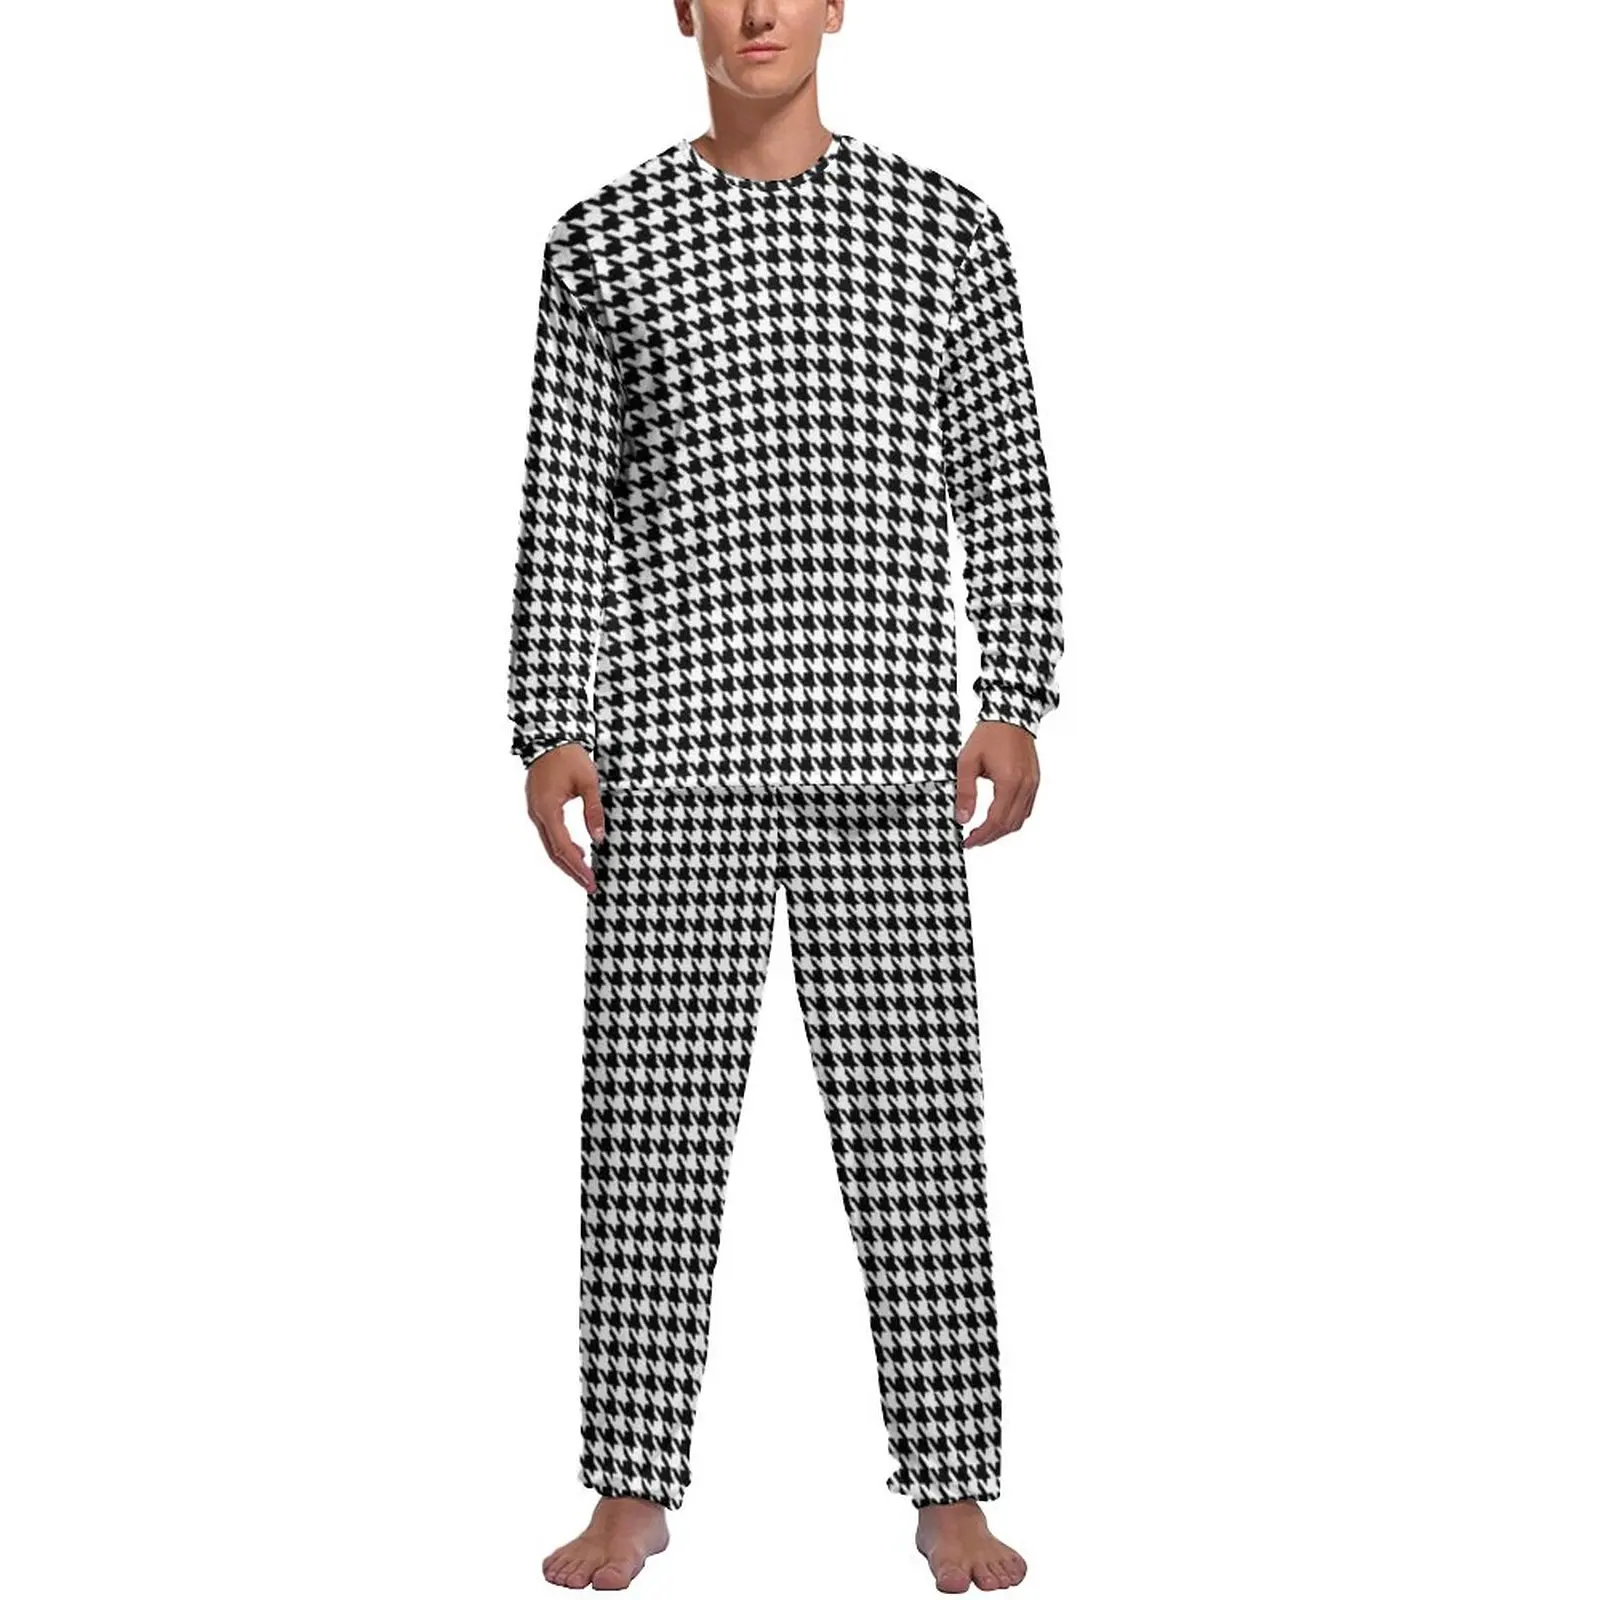 Classic Houndstooth Pajamas Winter Black And White Night Home Suit Man 2 Pieces Graphic Long Sleeves Kawaii Pajama Sets